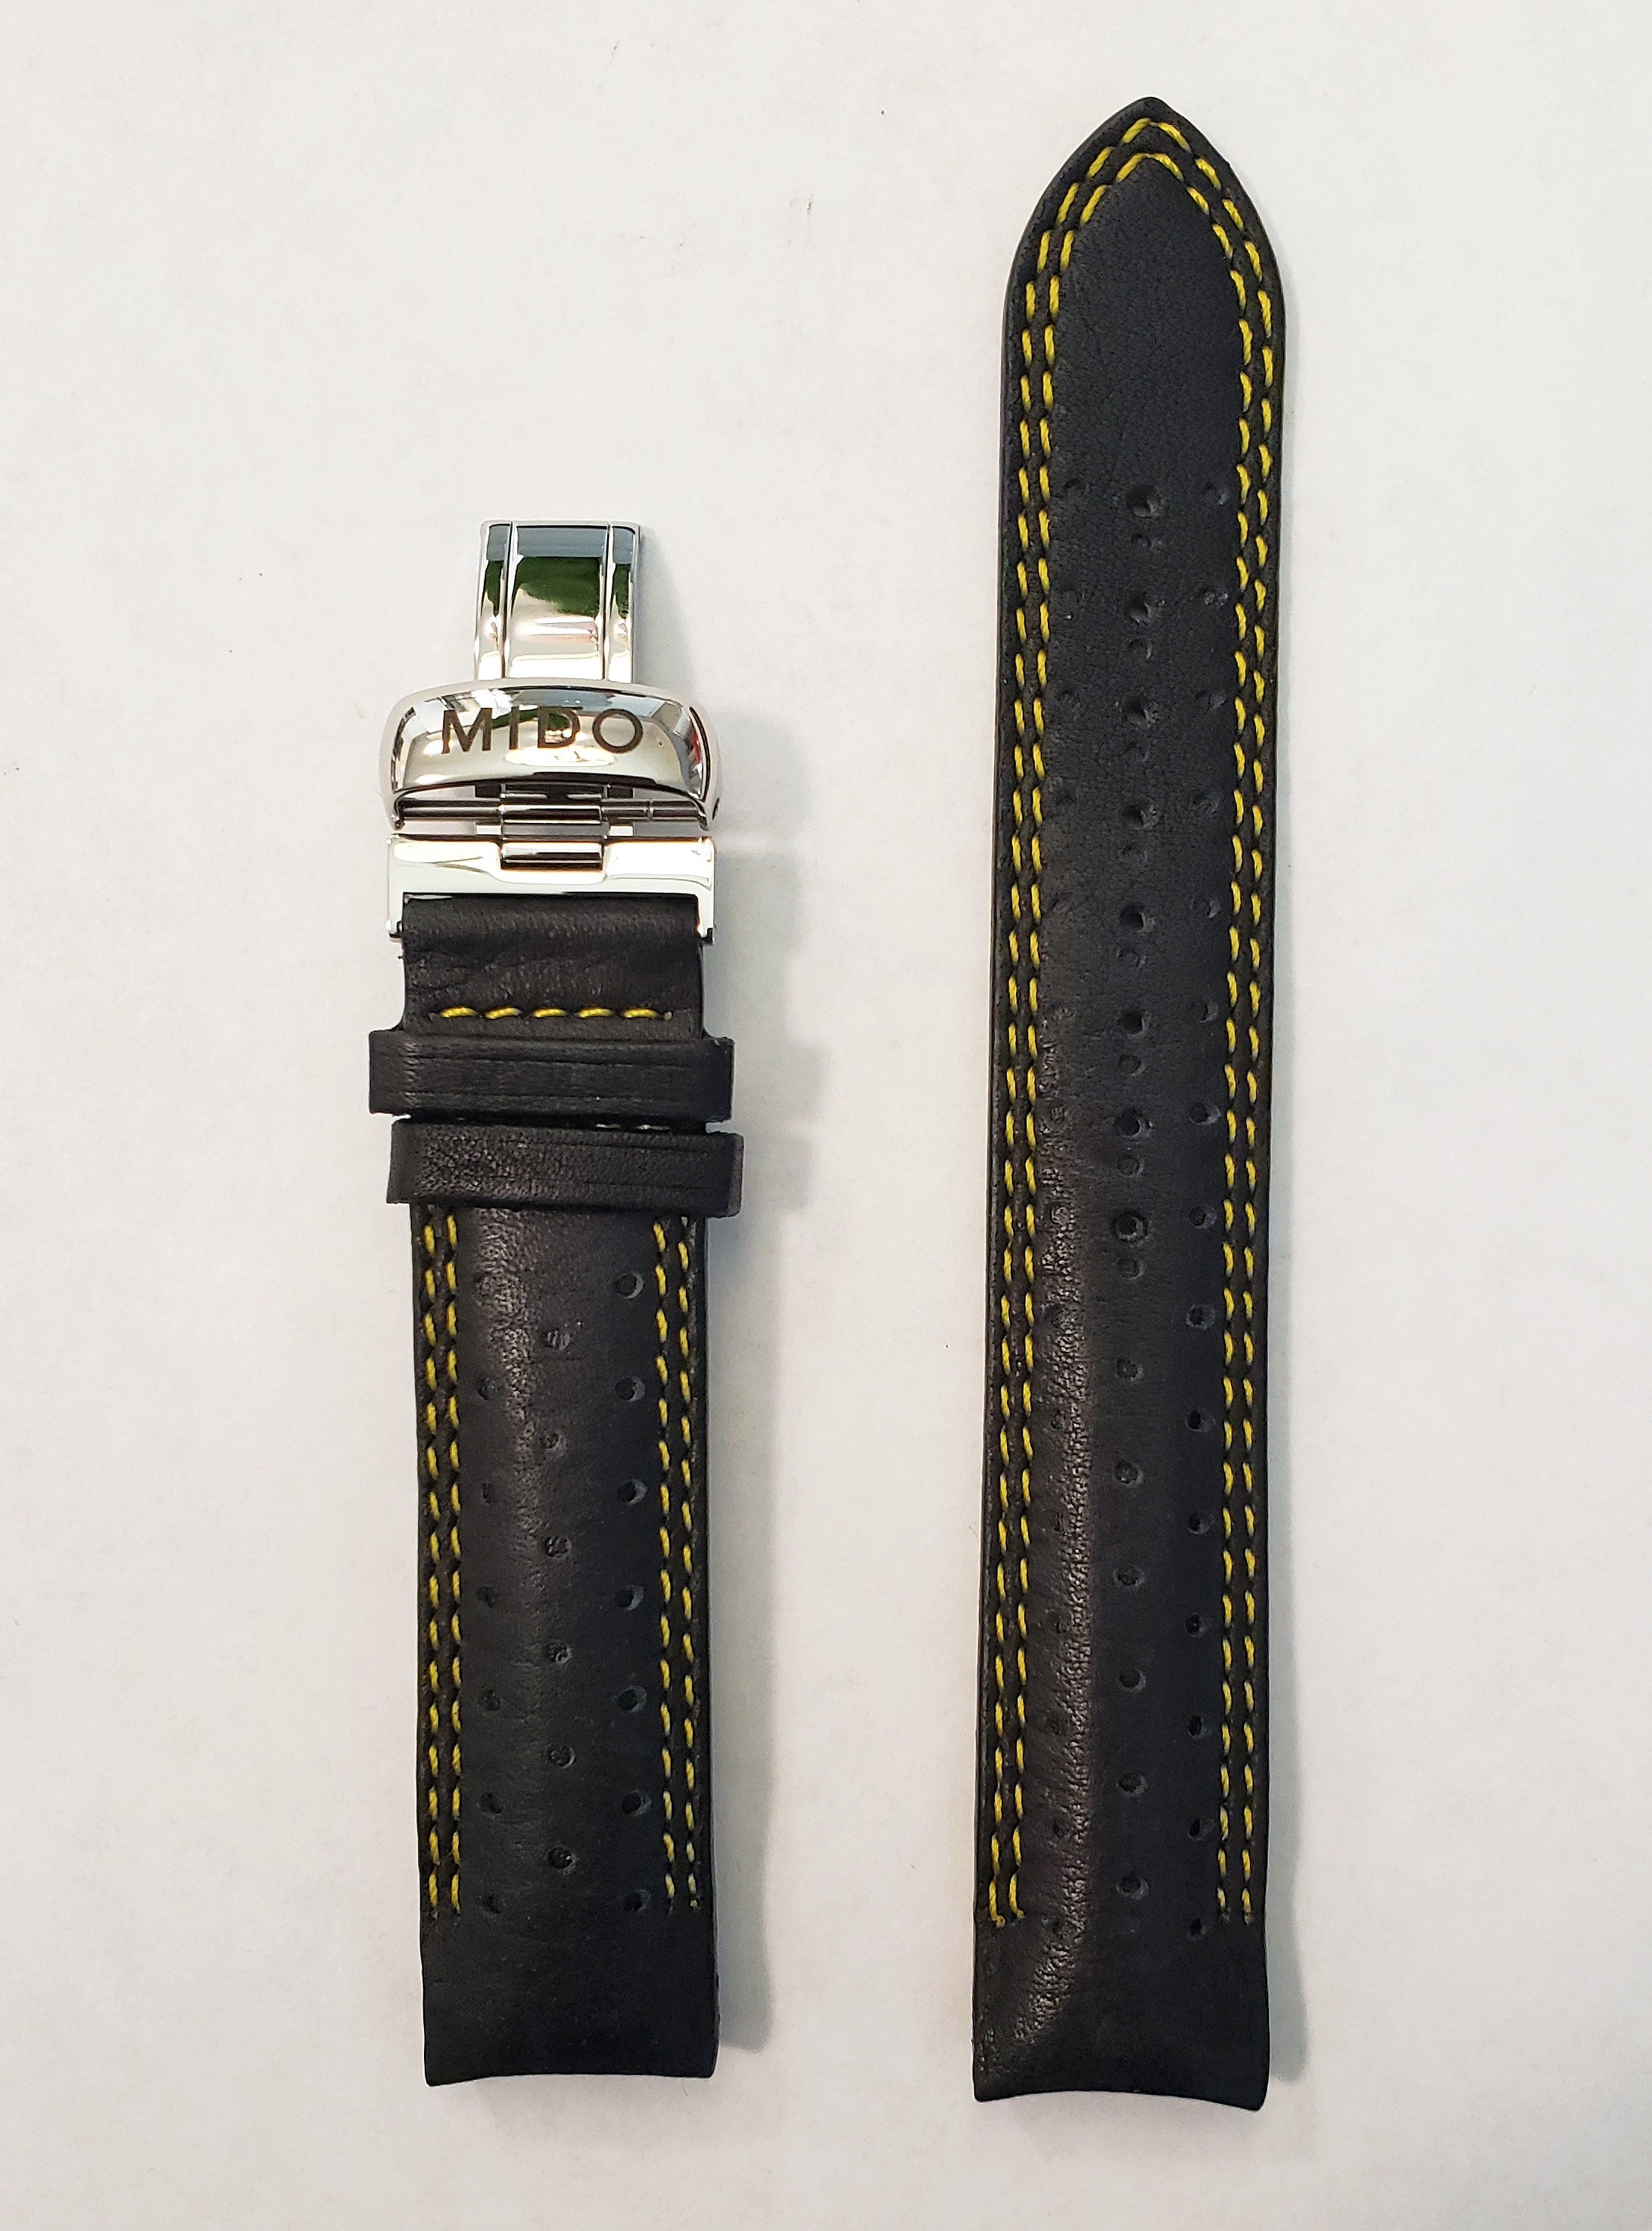 MIDO Ocean Star Model 8730 Black Leather Watch Band